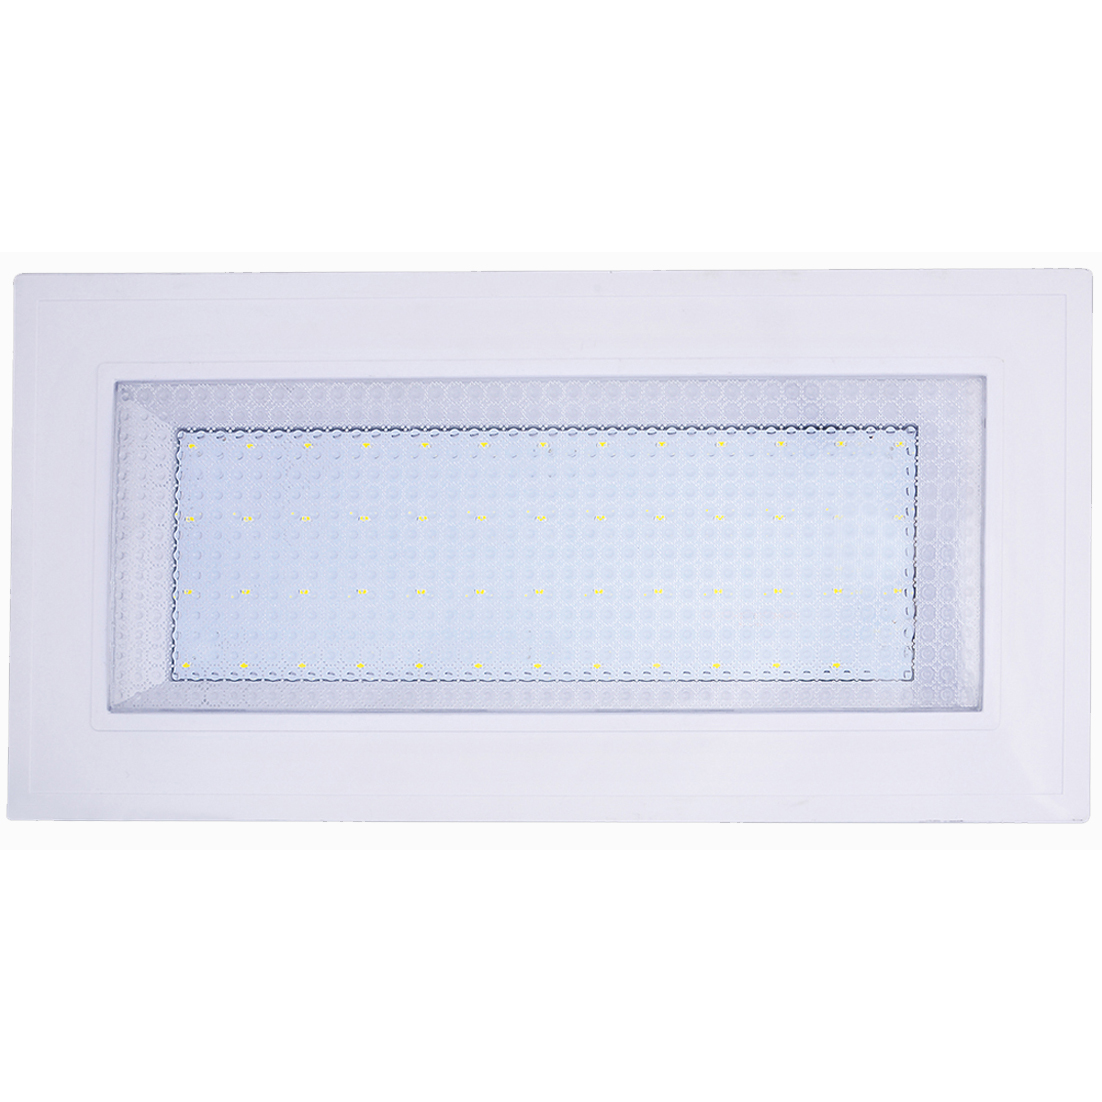 SMD5730 square LED kitchen & bath lamp recessed 